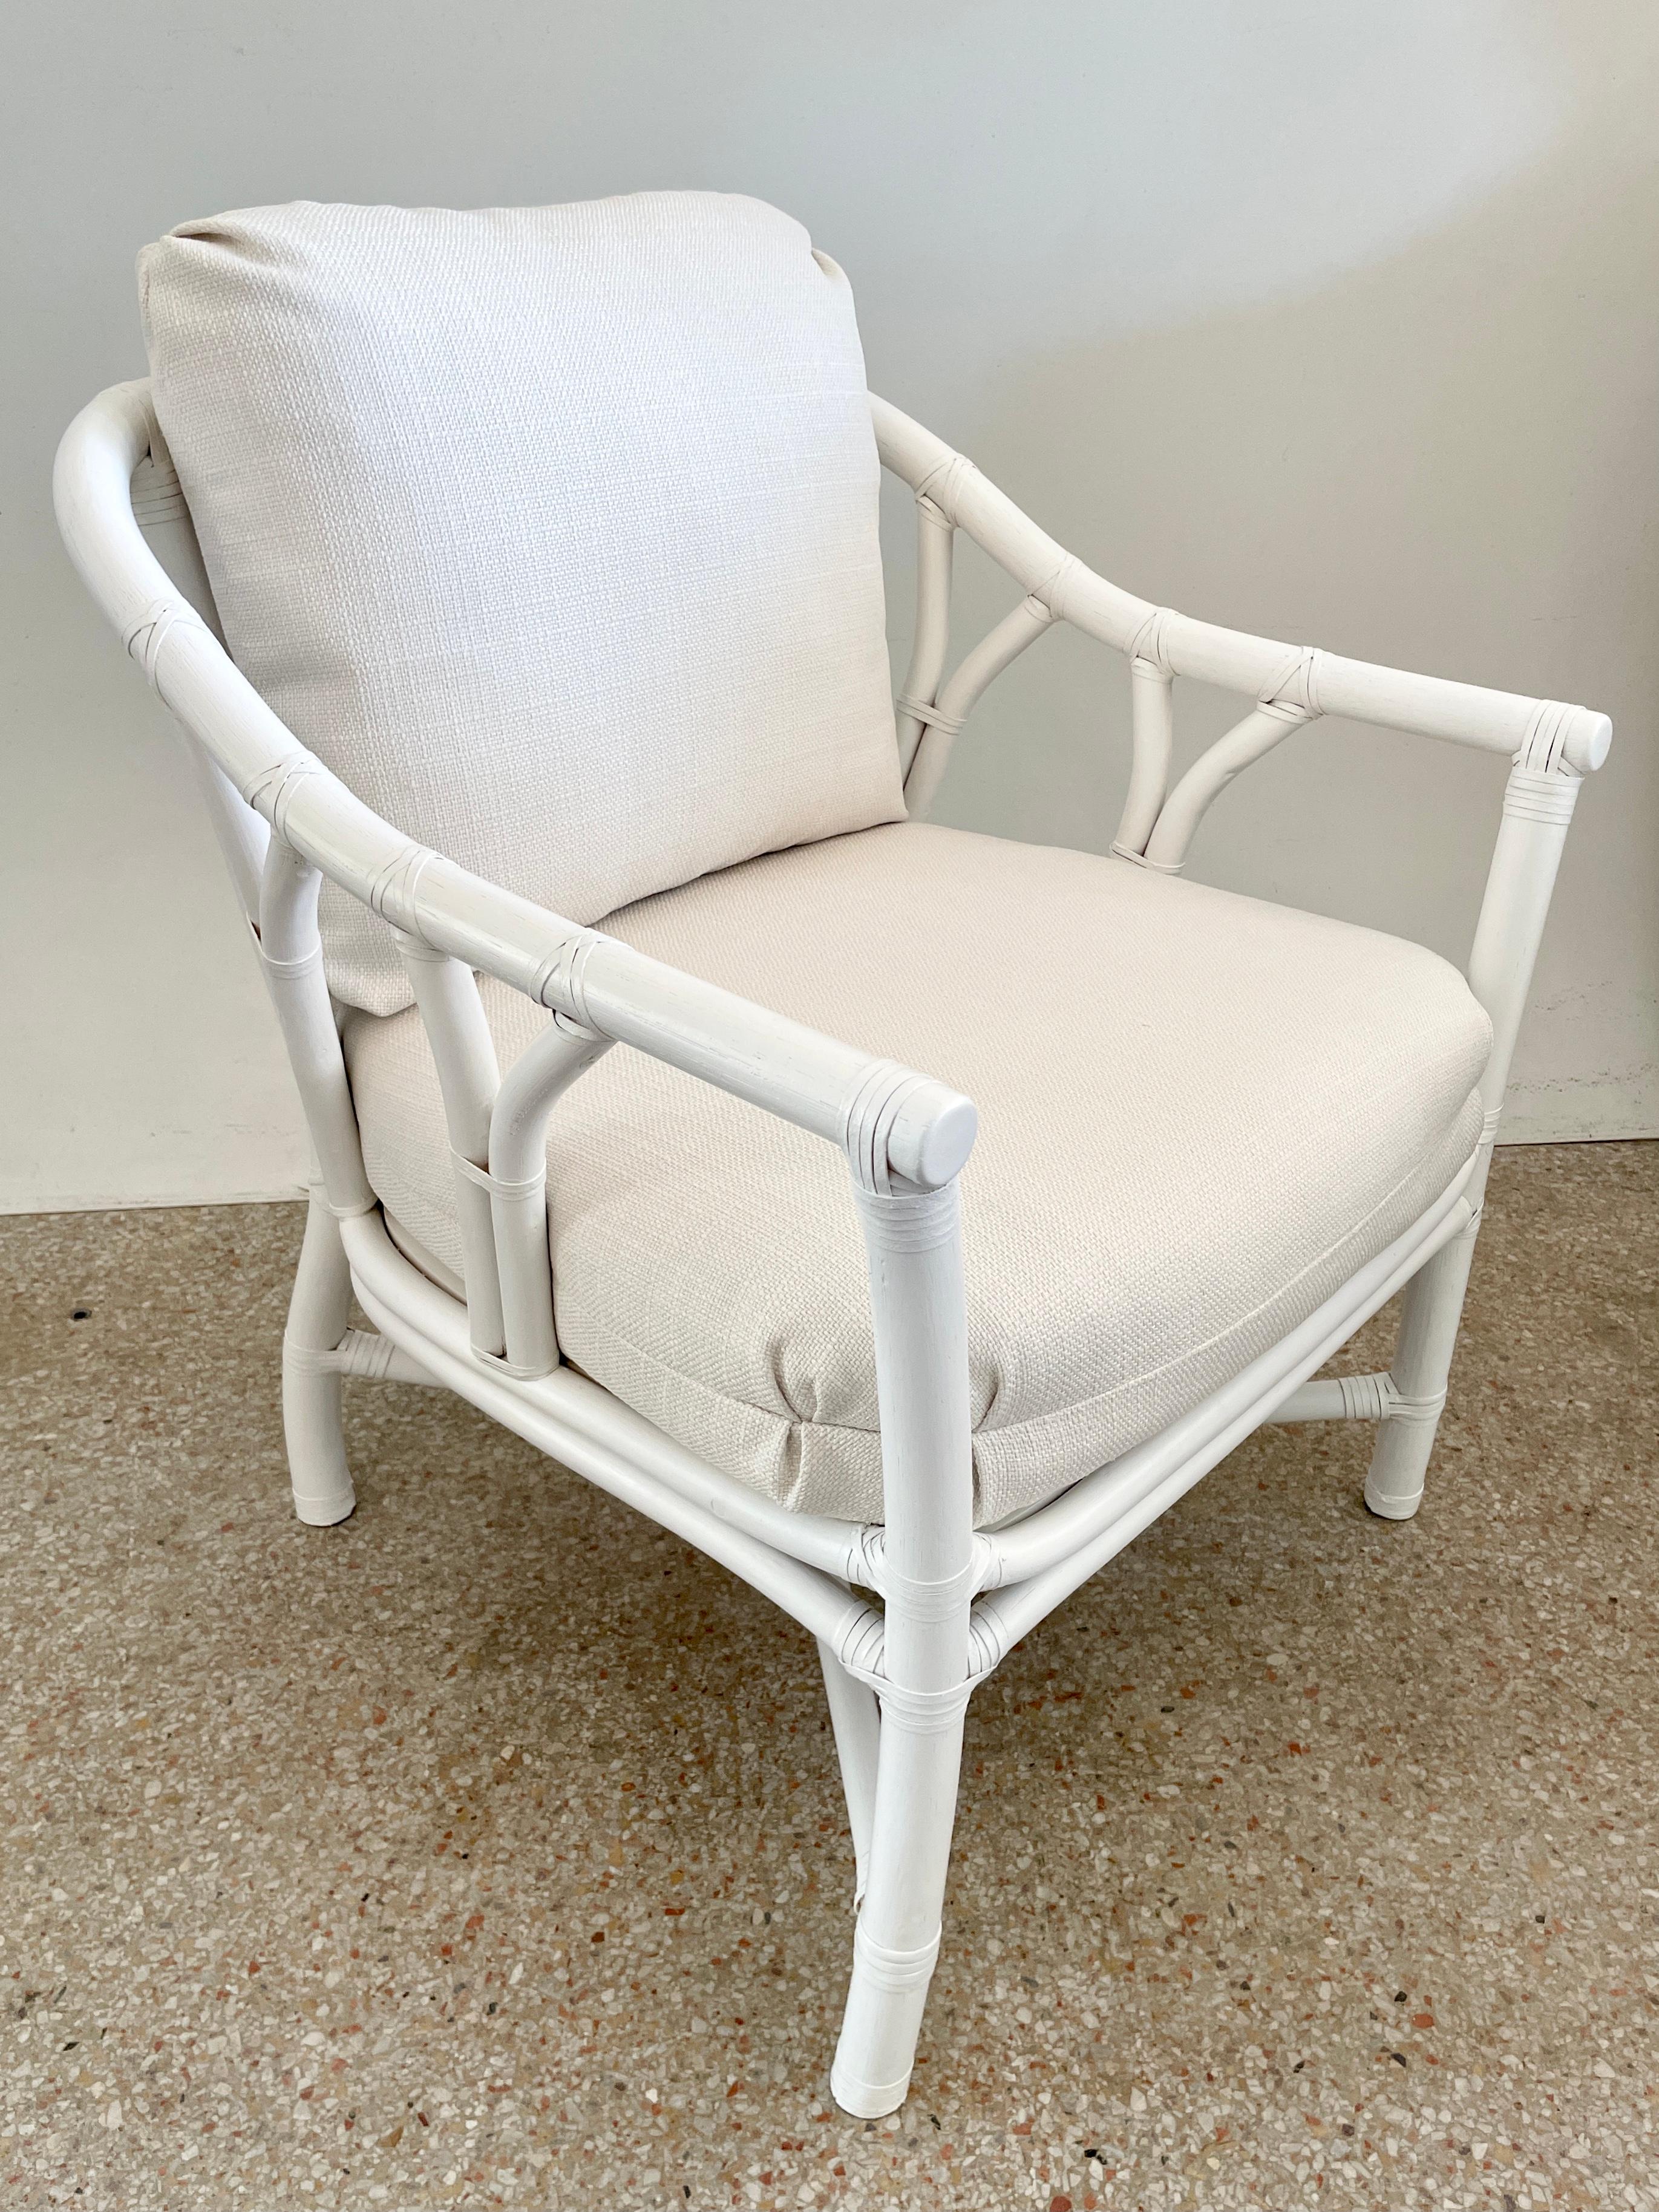 Mid-20th Century Ficks Reed Club Chair Upholstered in Todd Hase High Performance For Sale